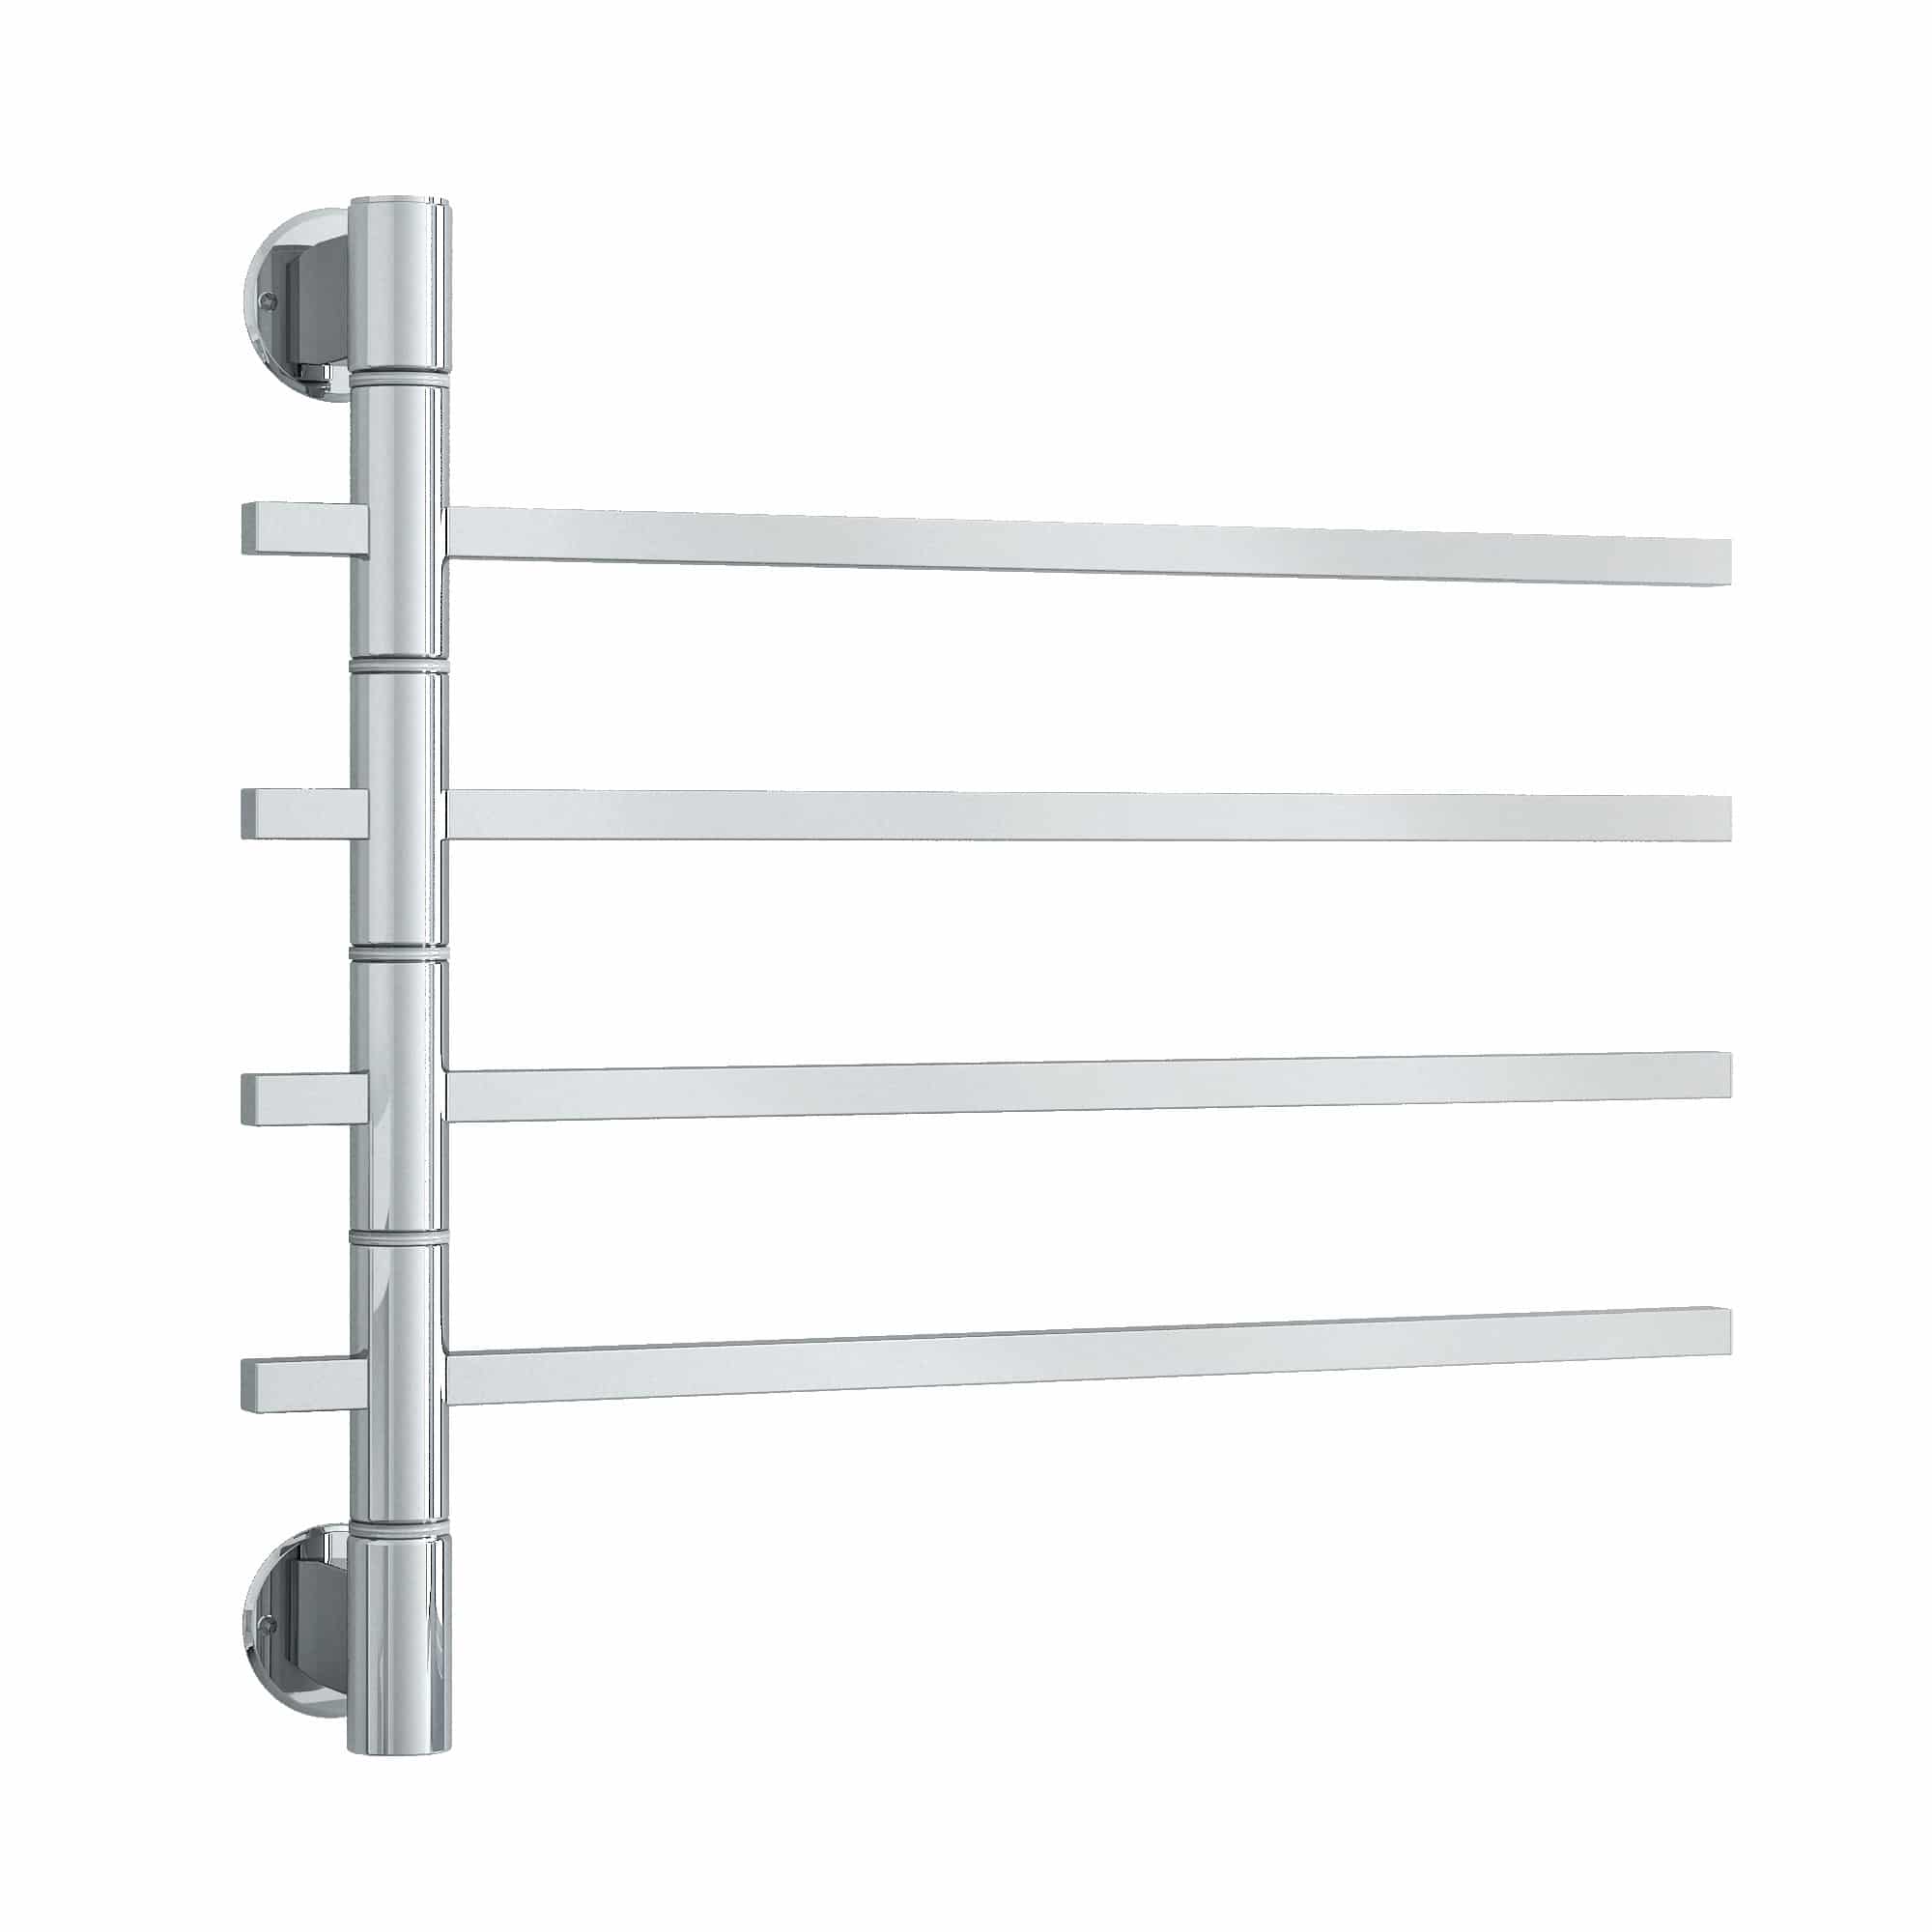 THERMOGROUP USV35 STRAIGHT SQUARE SWIVEL NON-HEATED TOWEL RAIL 600MM